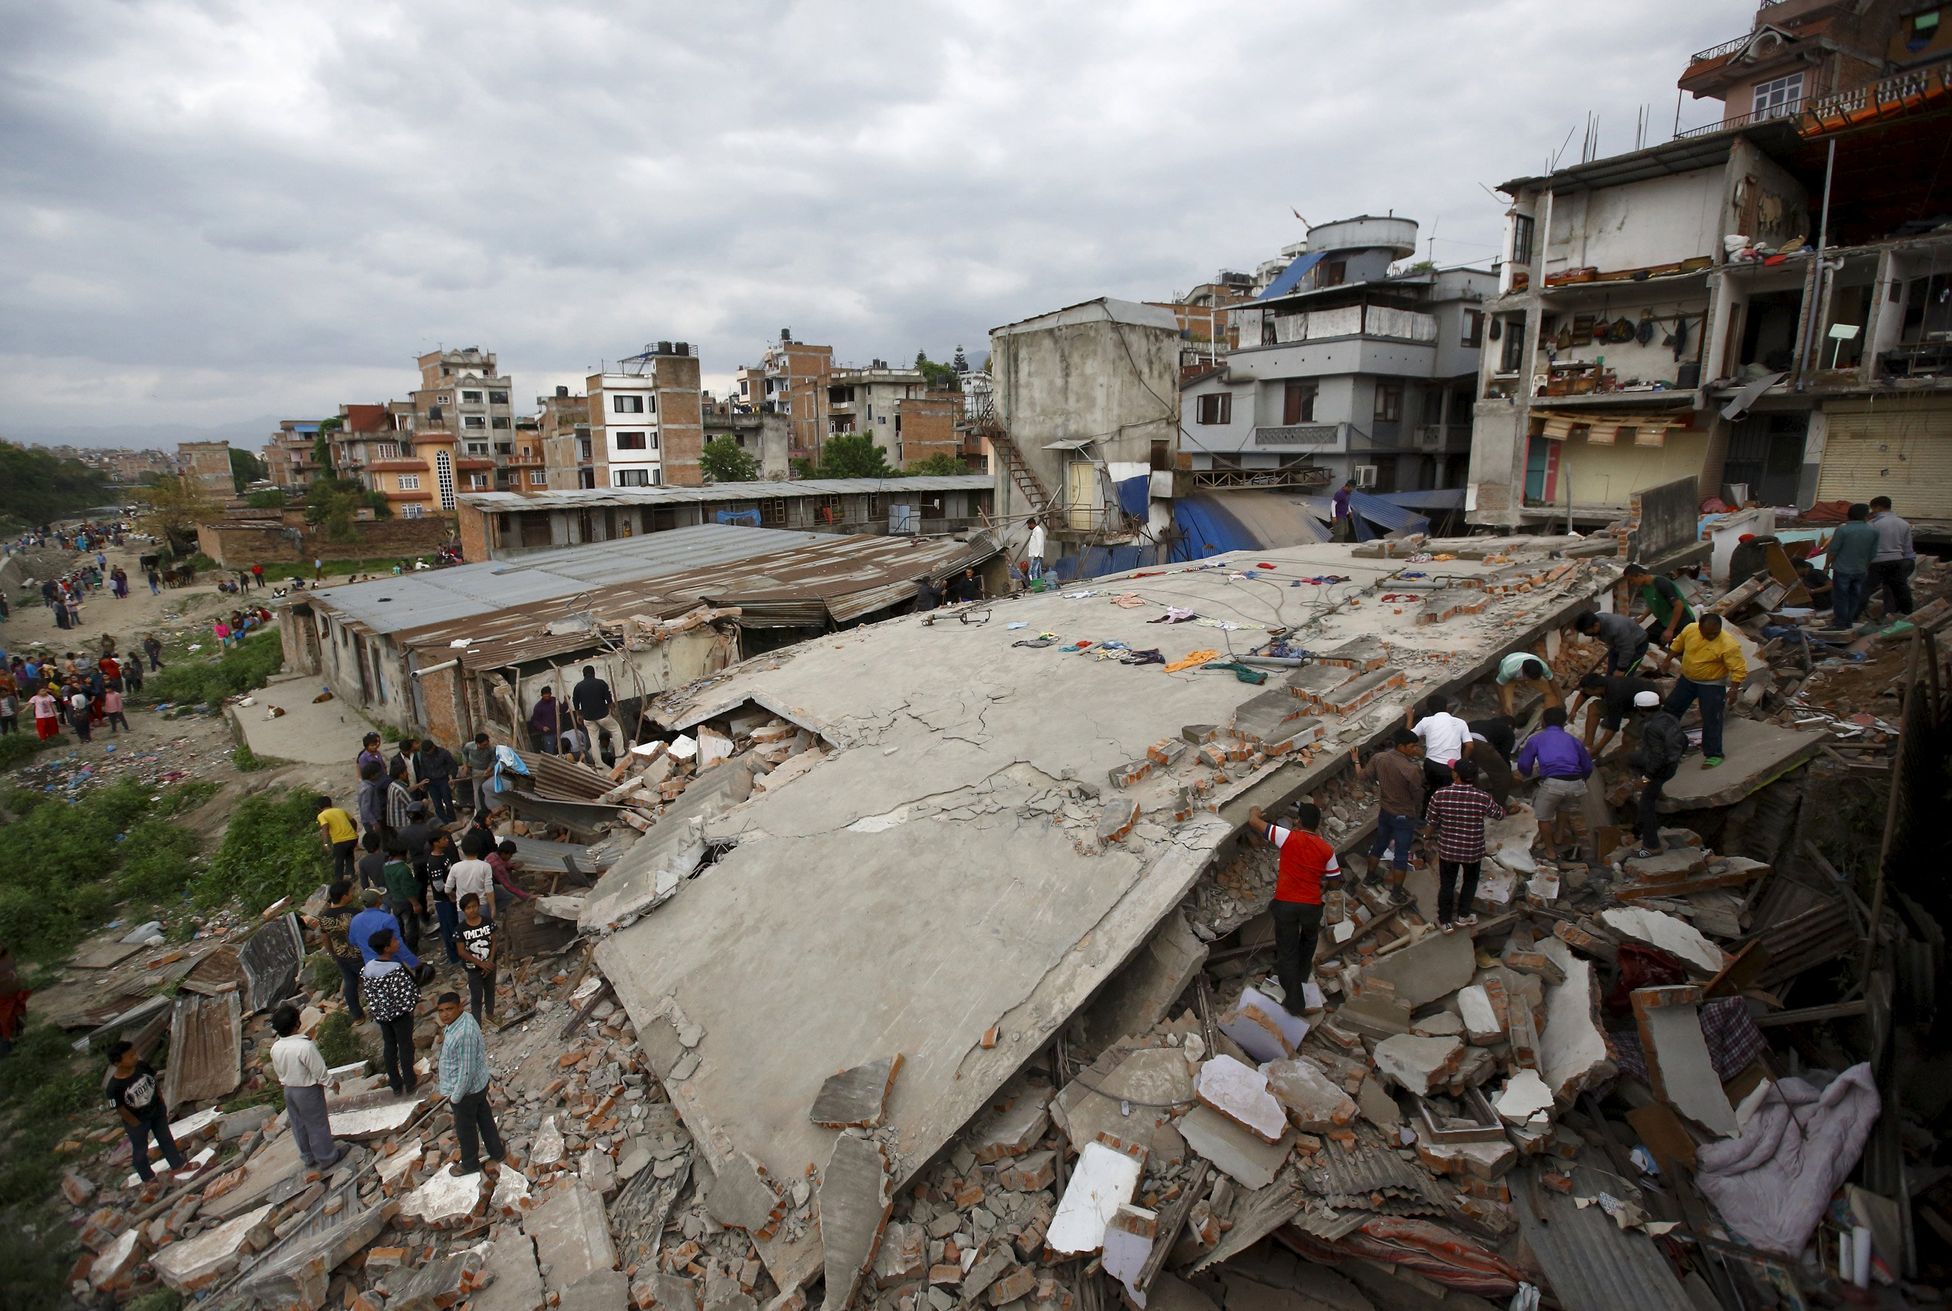 People gather near a collapsed house after major earthquake in Kathmandu